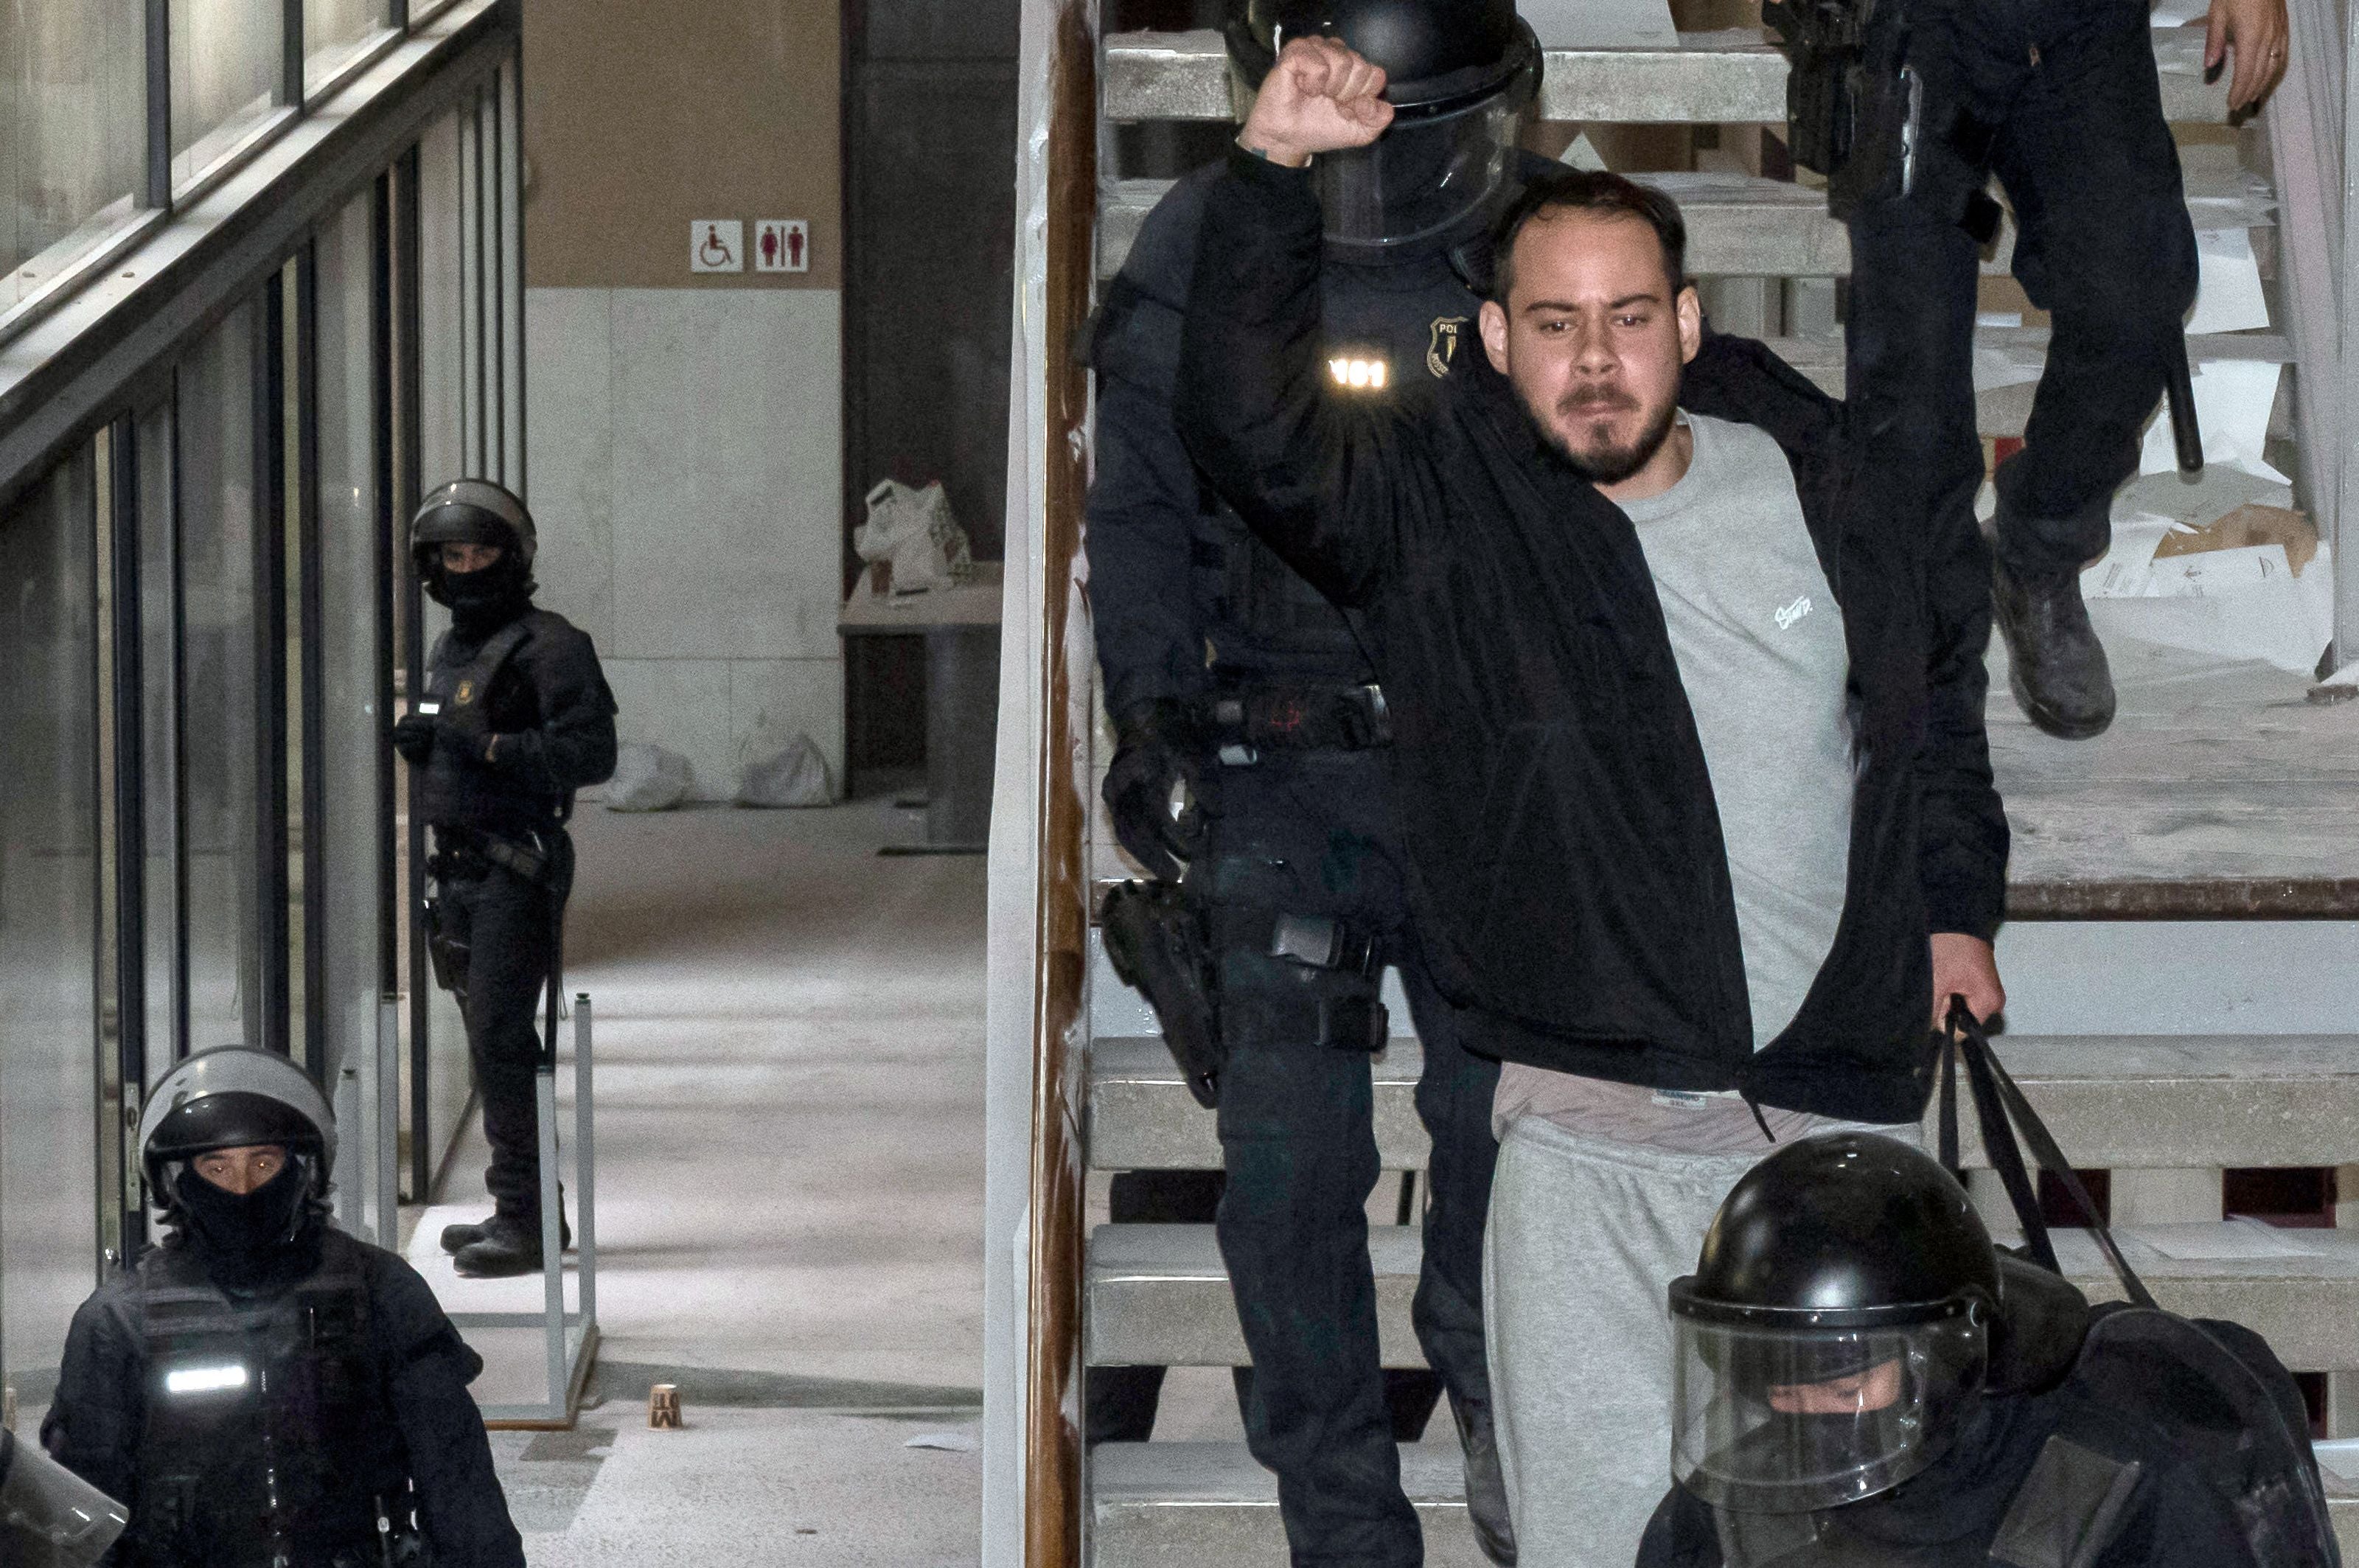 Catalan rapper Pablo Hasel is arrested by police at the University of Lleida, 150 kms (90 miles) west of Barcelona, on February 16, 2021 where he had barricaded himself.